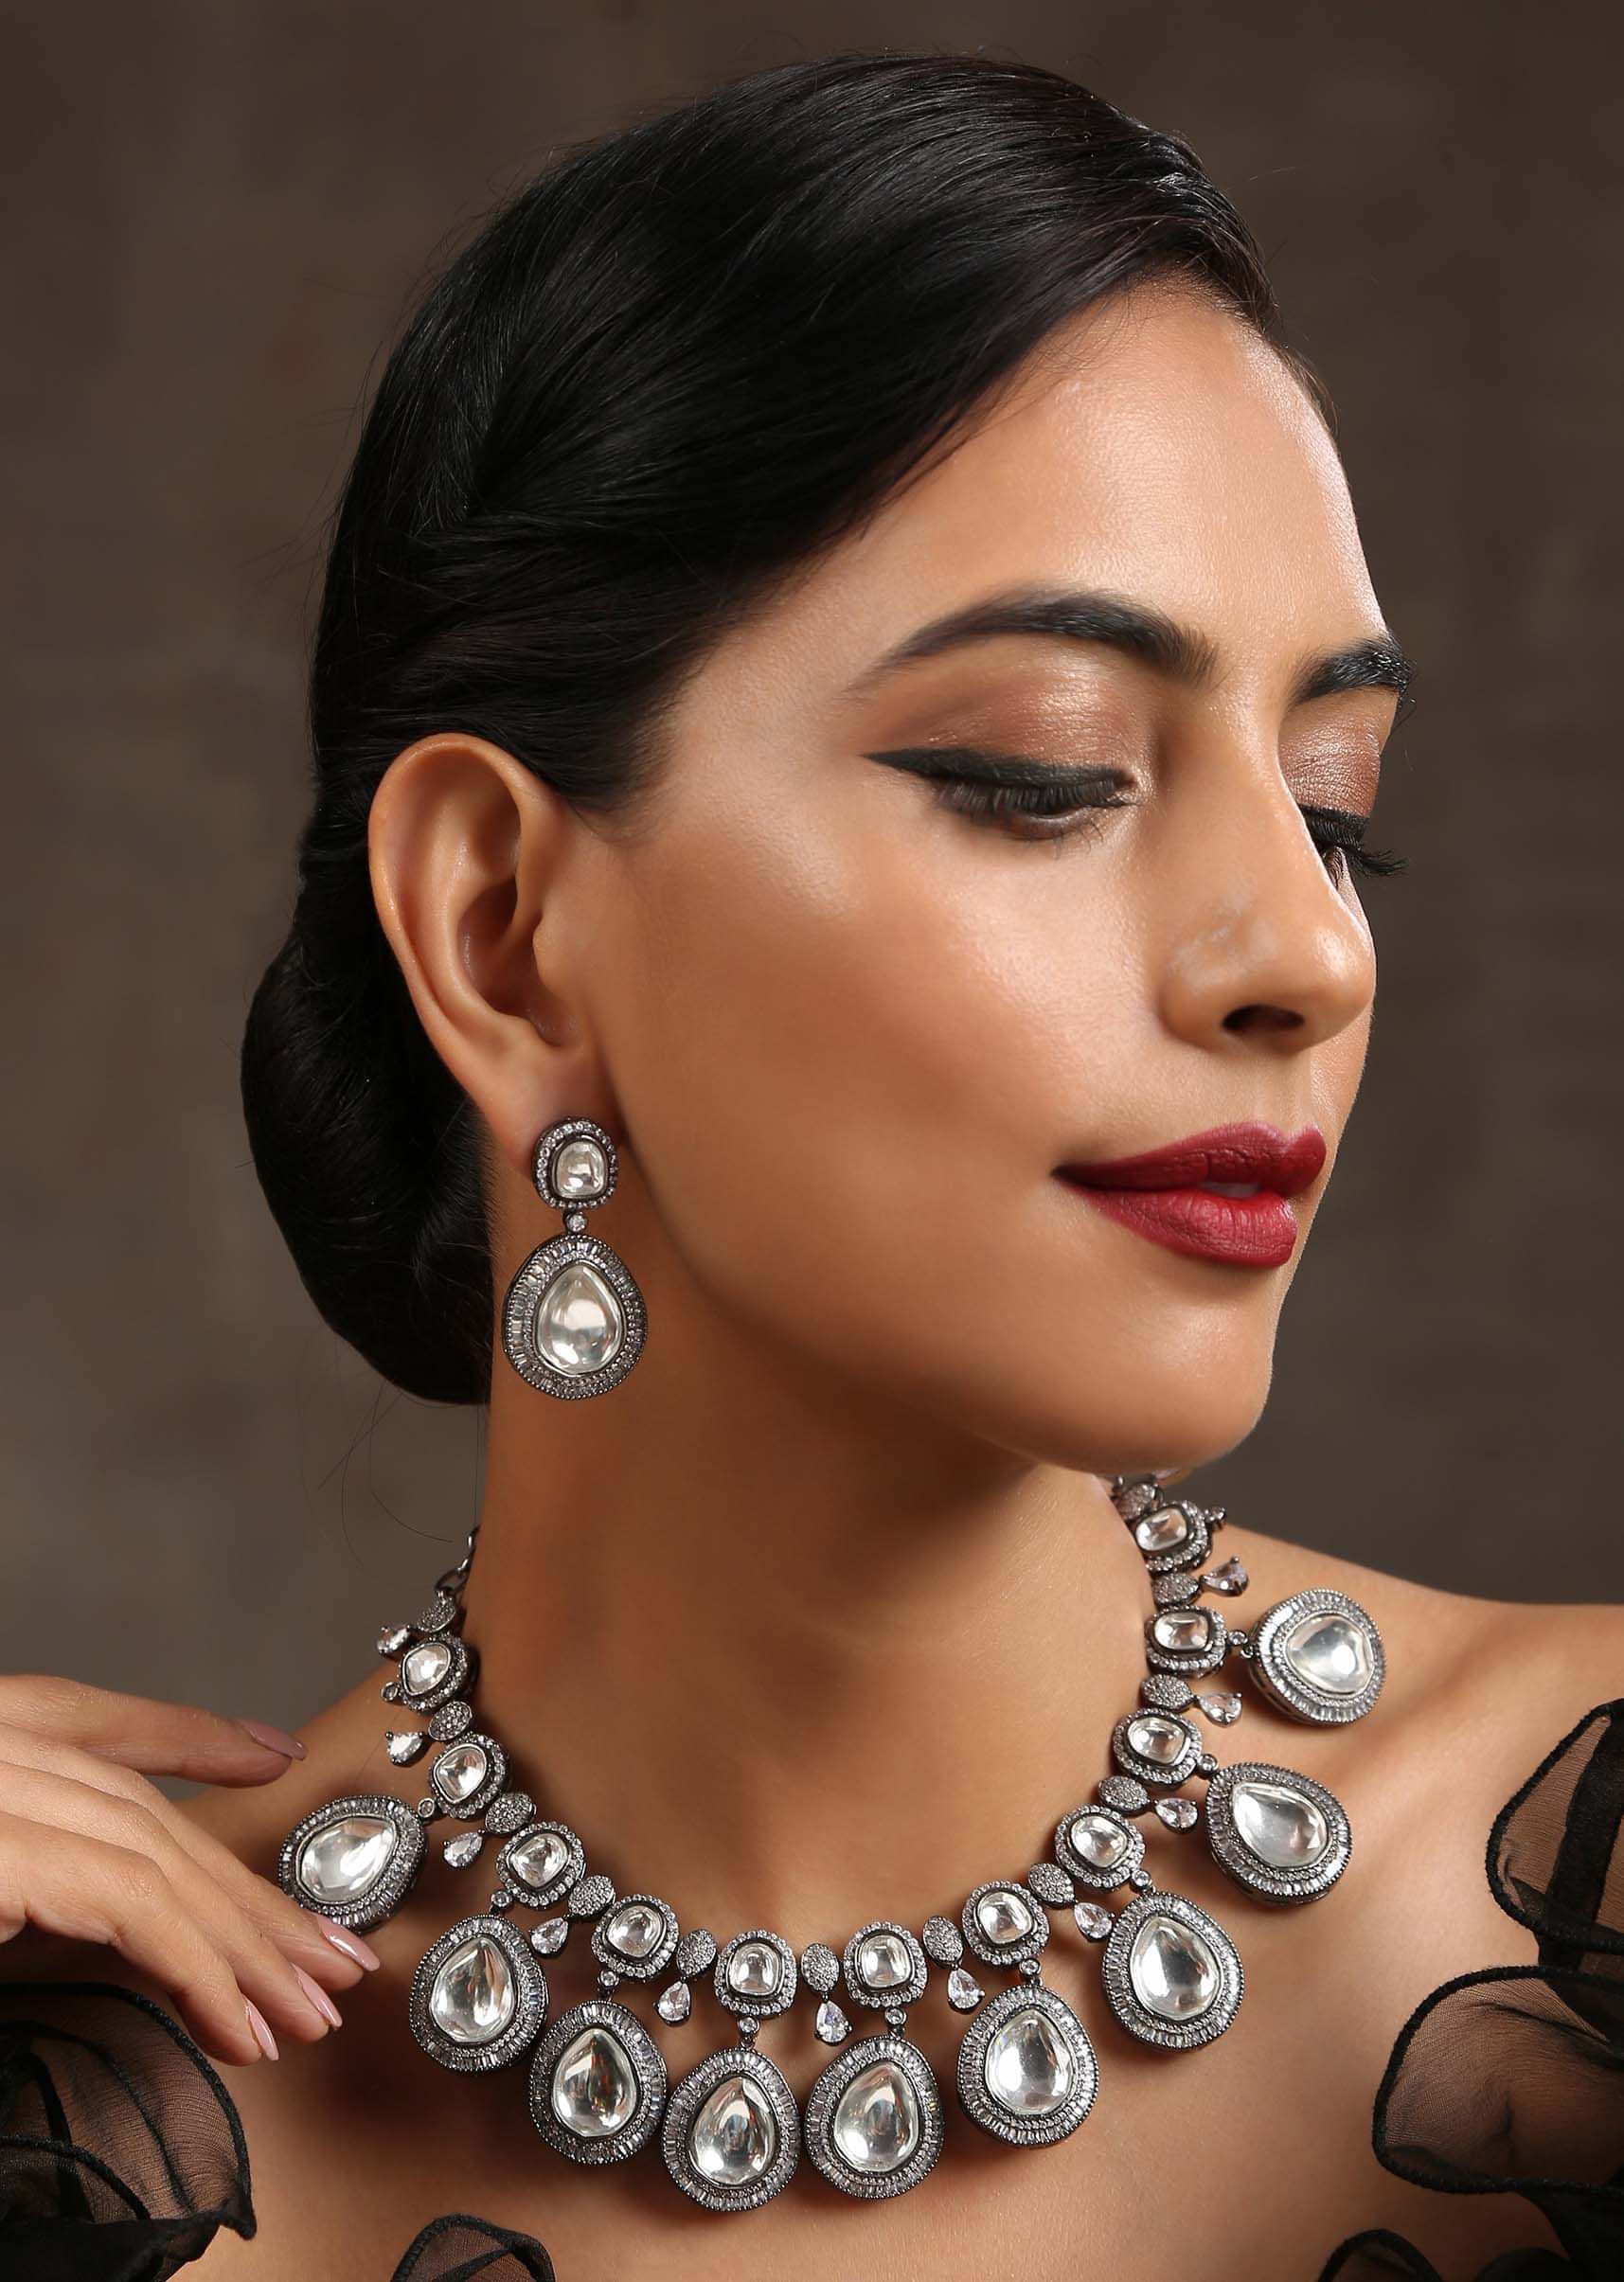 Silver Necklace With Kundan Polki In A Contemporary Design Along With Zirconia Stones